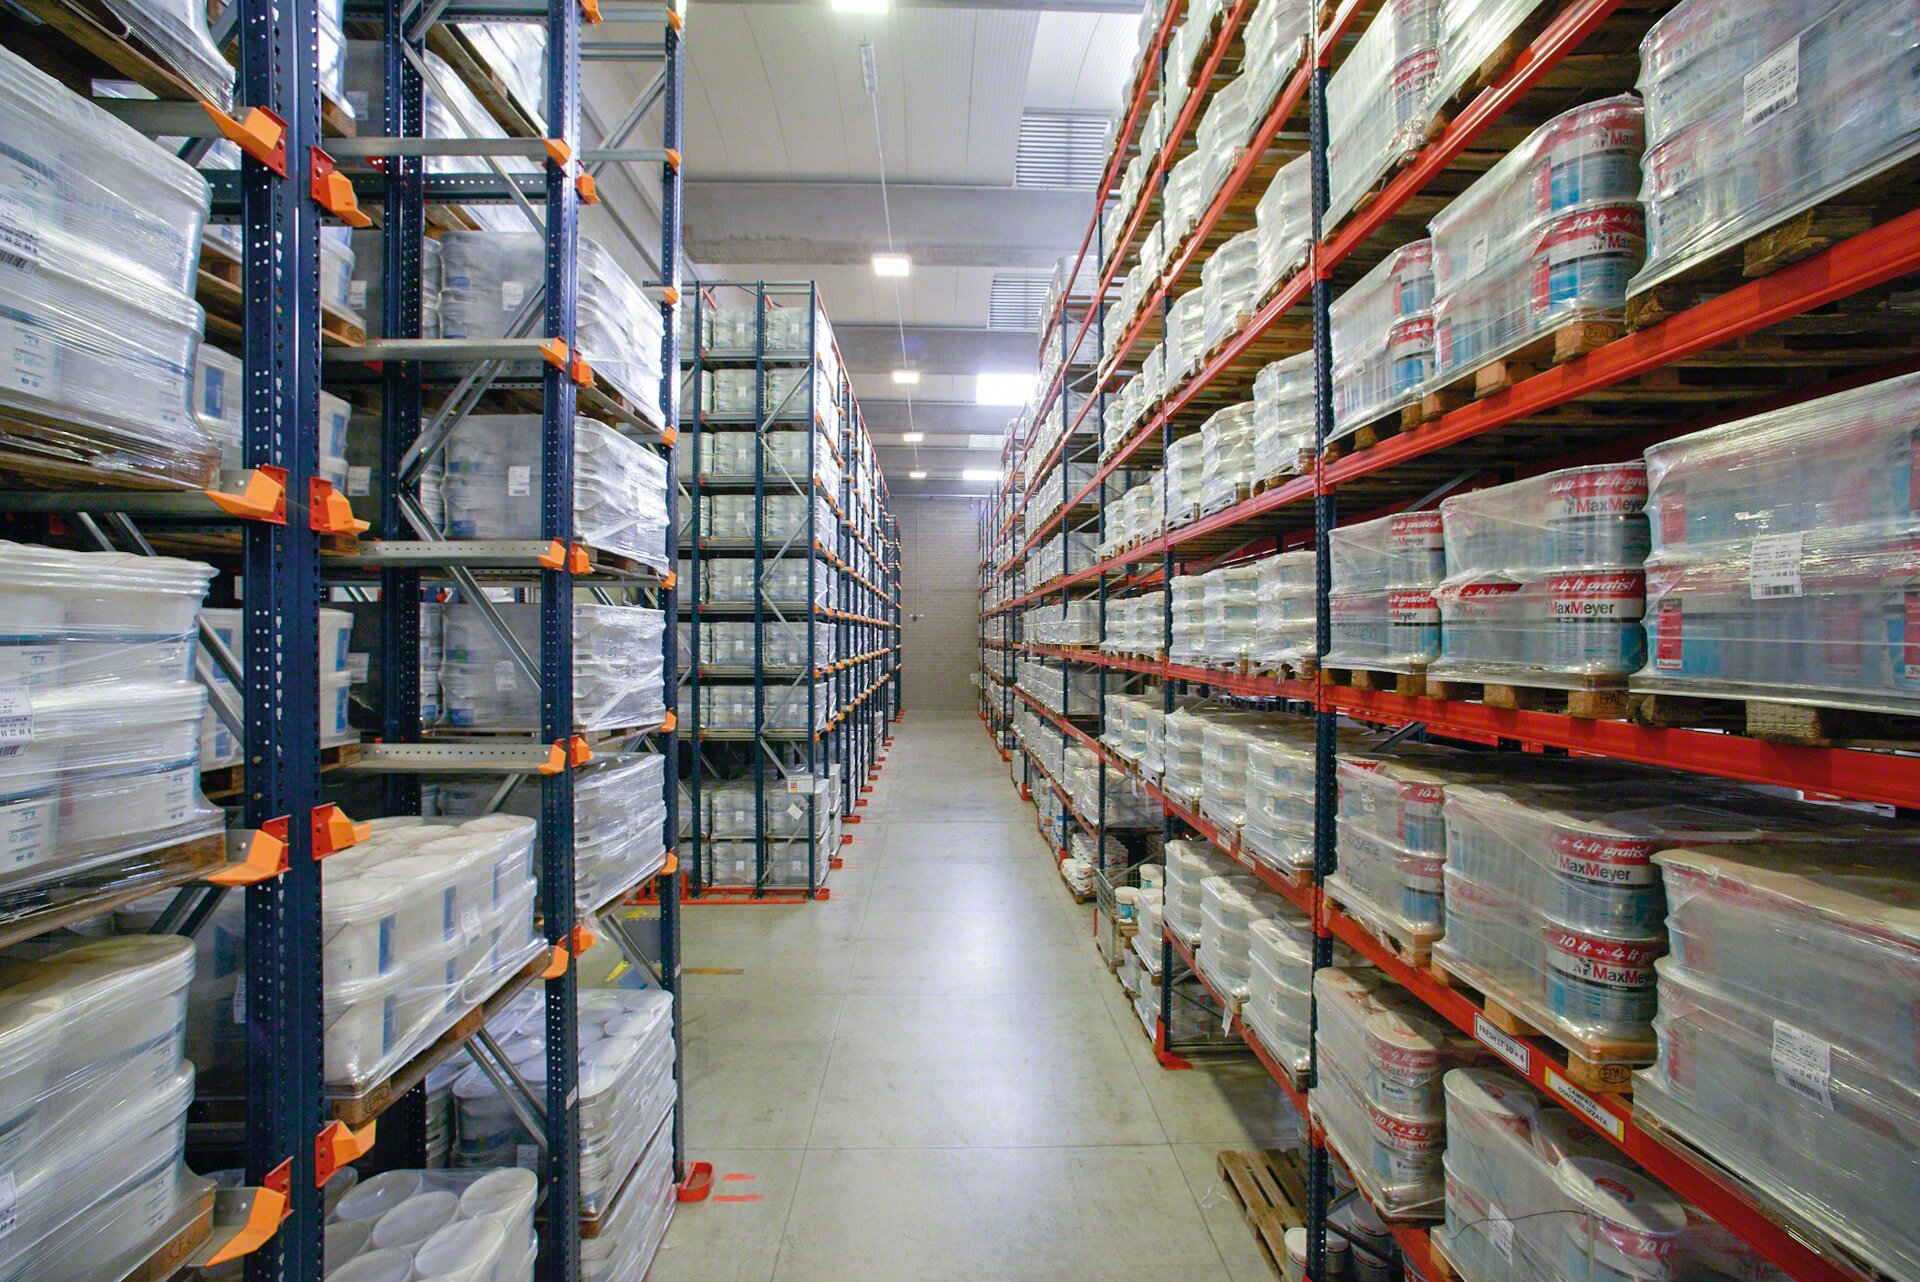 This installation combines pallet racks with high-density drive-in racking